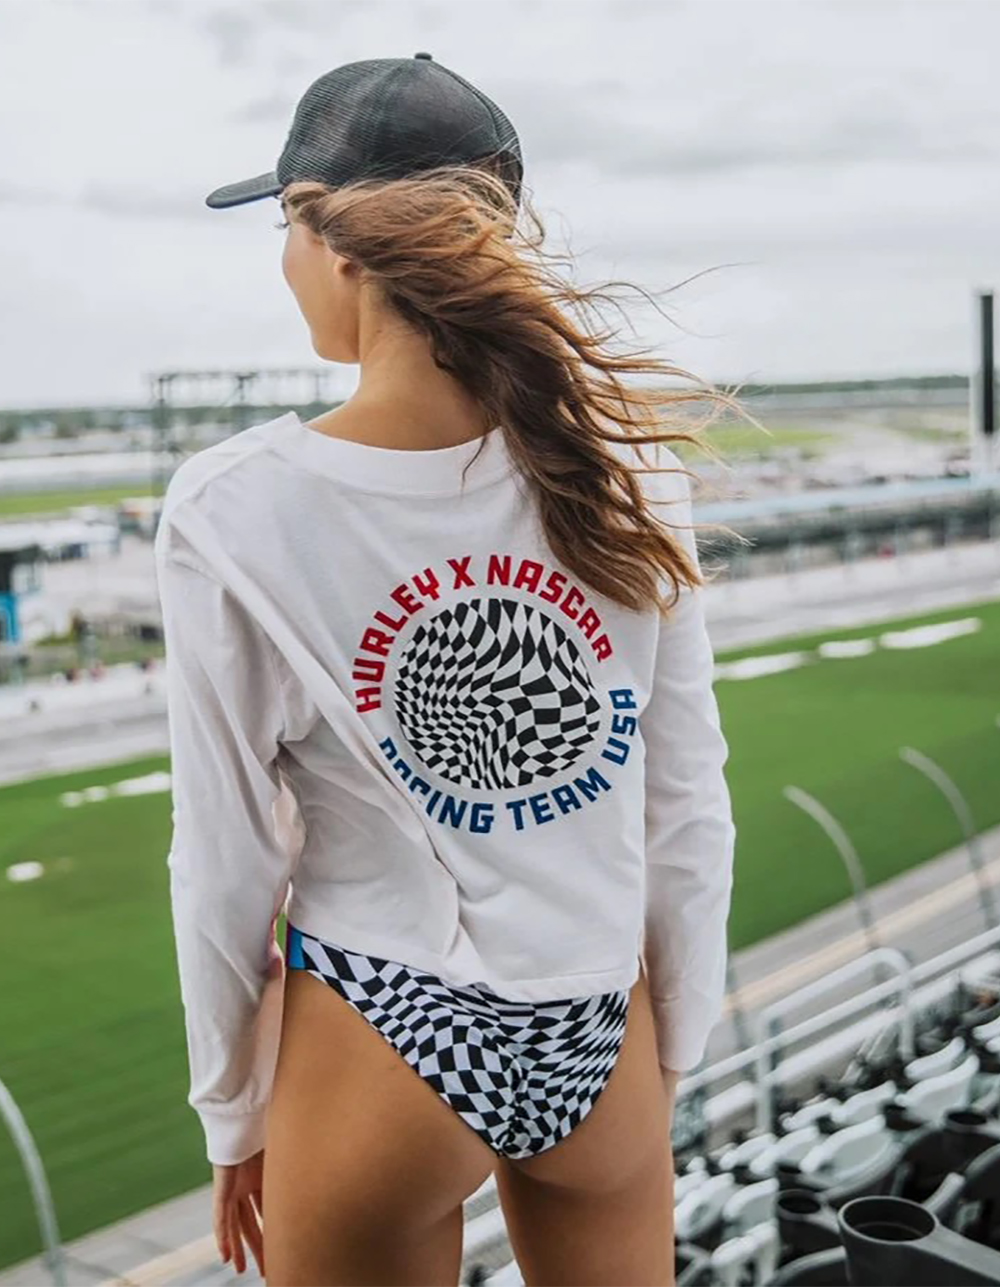 THE NASCAR X HURLEY COLLECTION